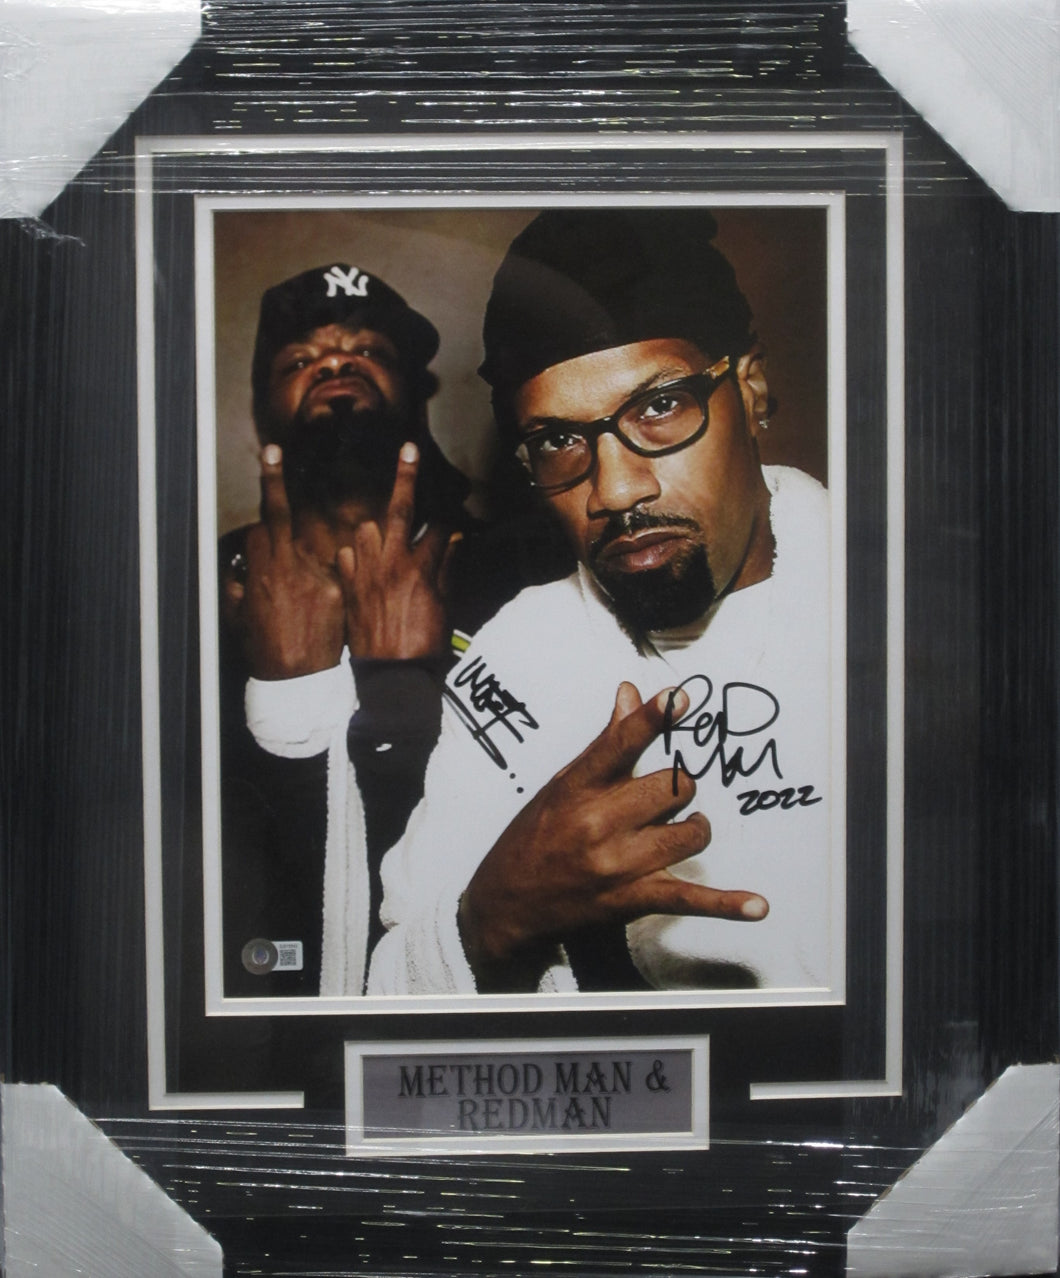 American Rappers Method Man & Redman Dual Signed 11x14 Photo Framed & Matted with BECKETT COA